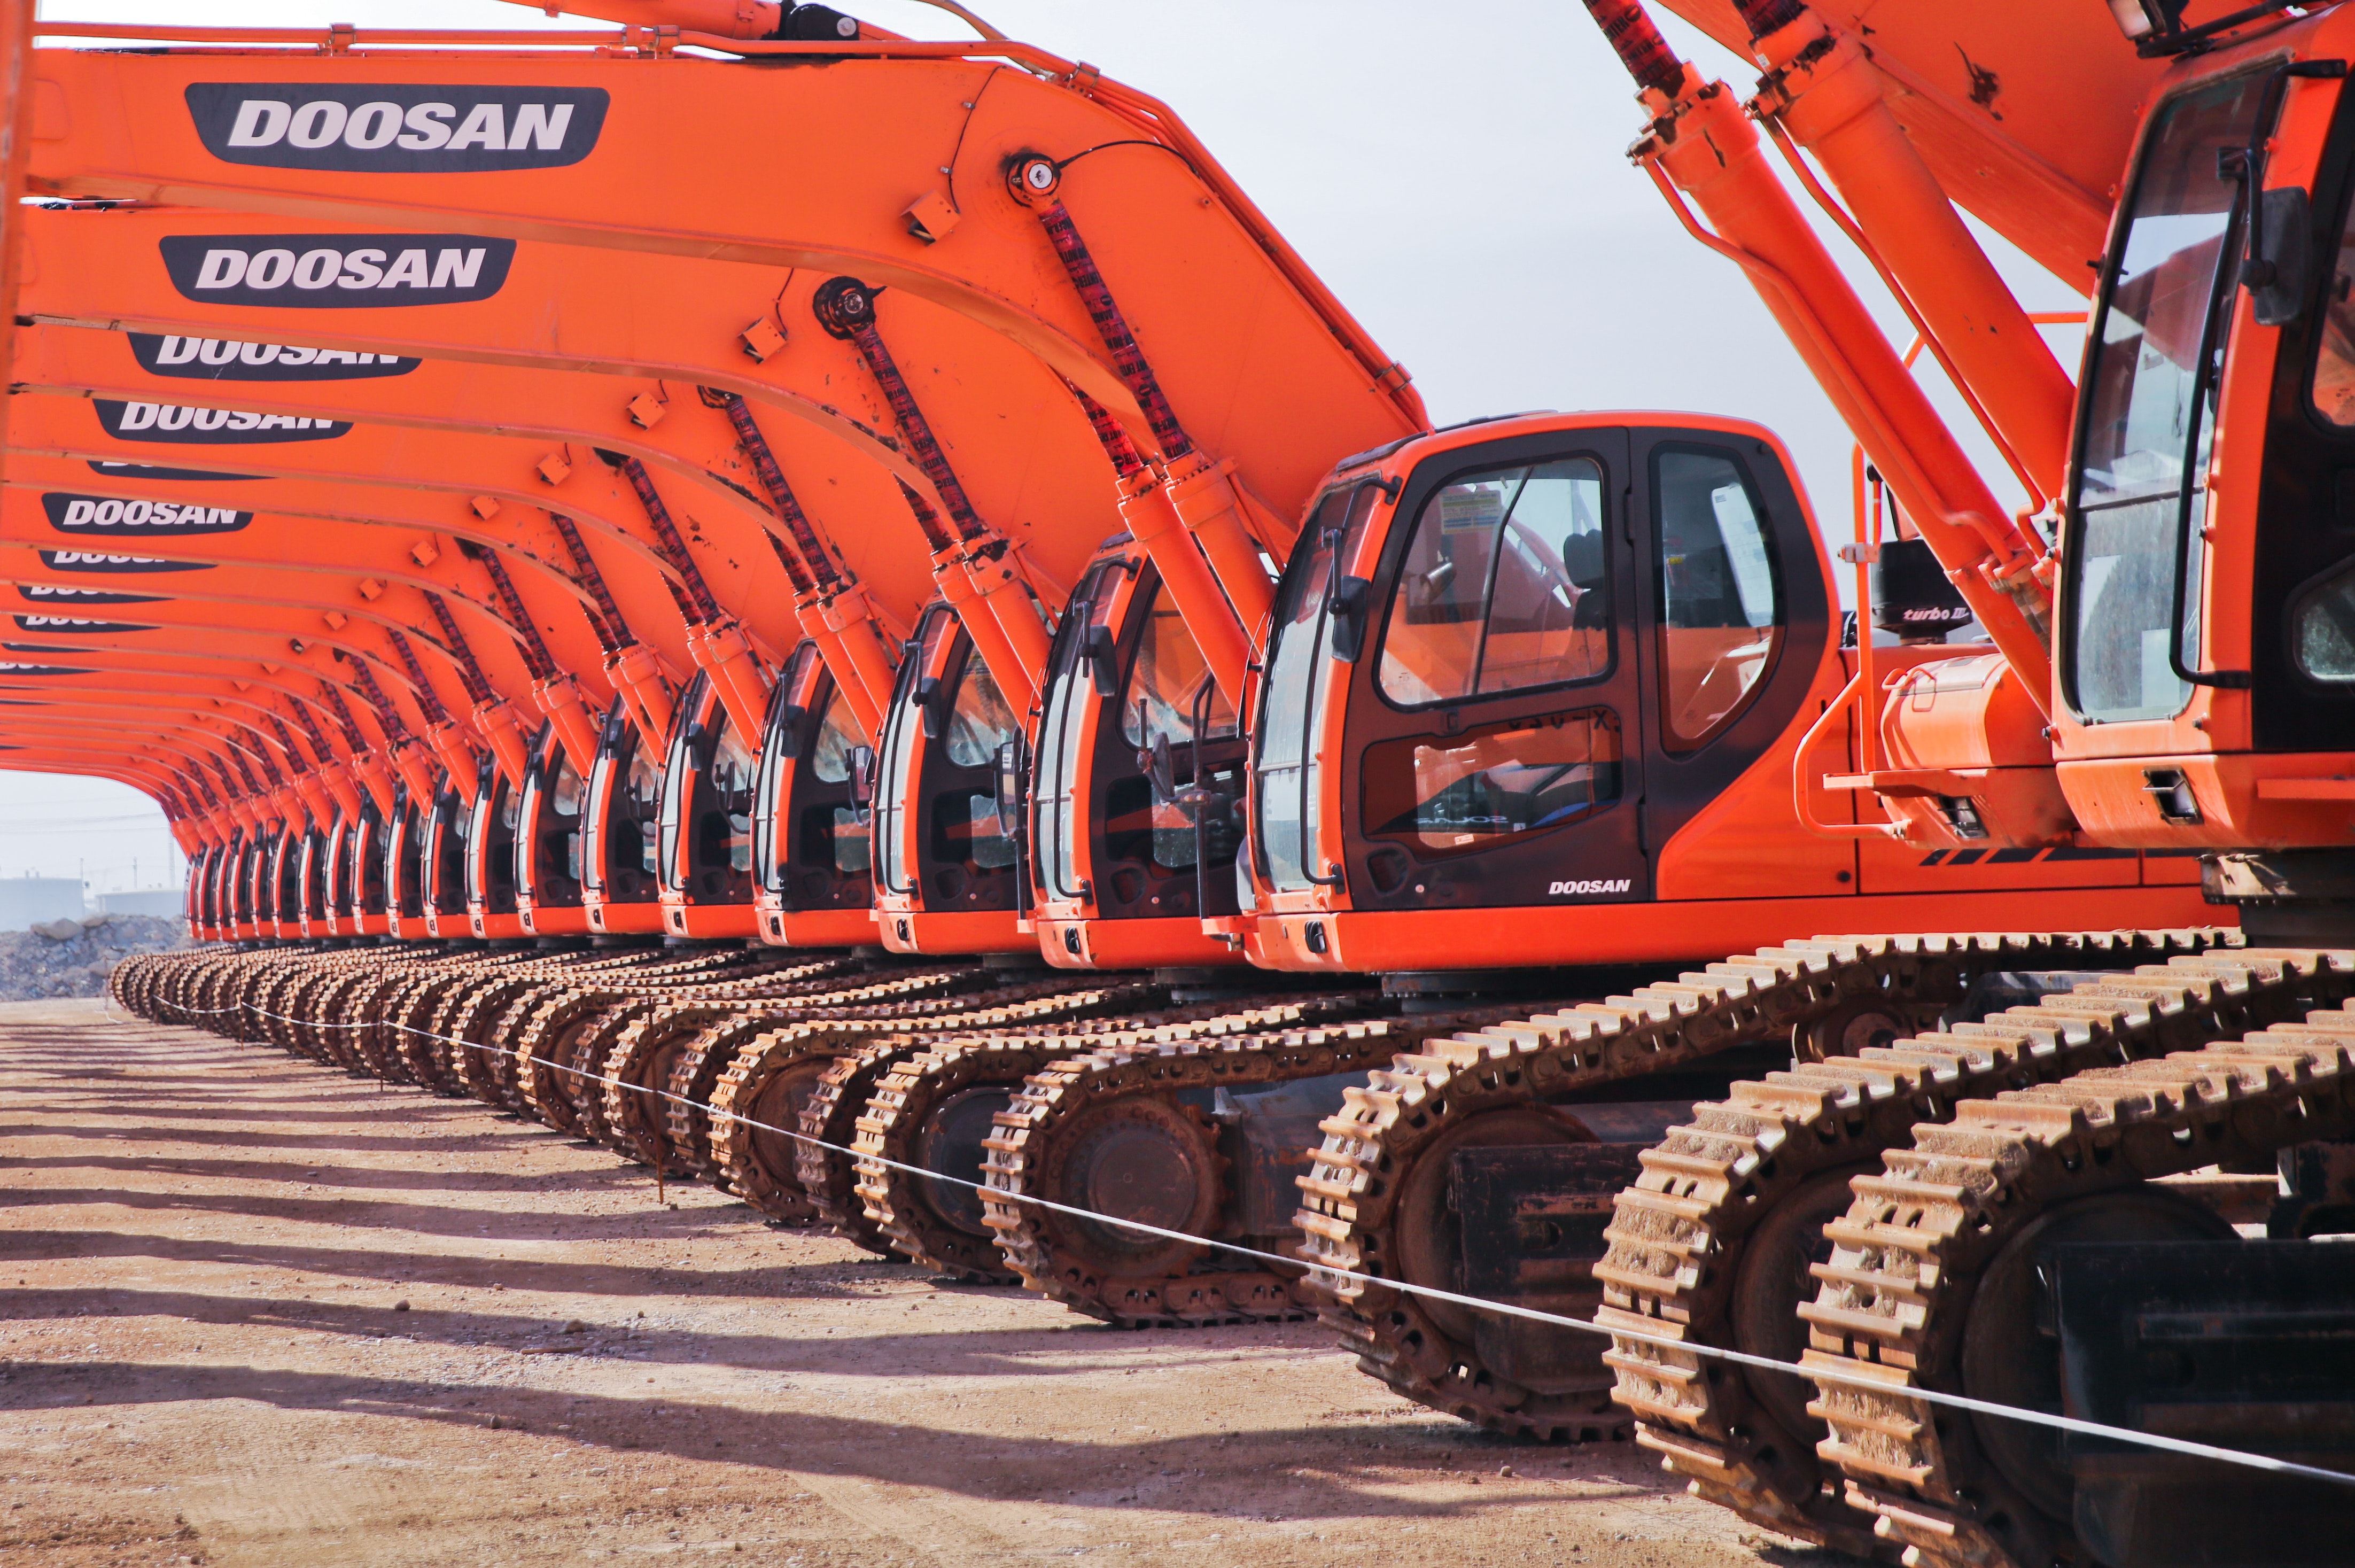 Red Doosan Ride-on Tractors, Daytime, Outdoors, Technology, Steel, HQ Photo